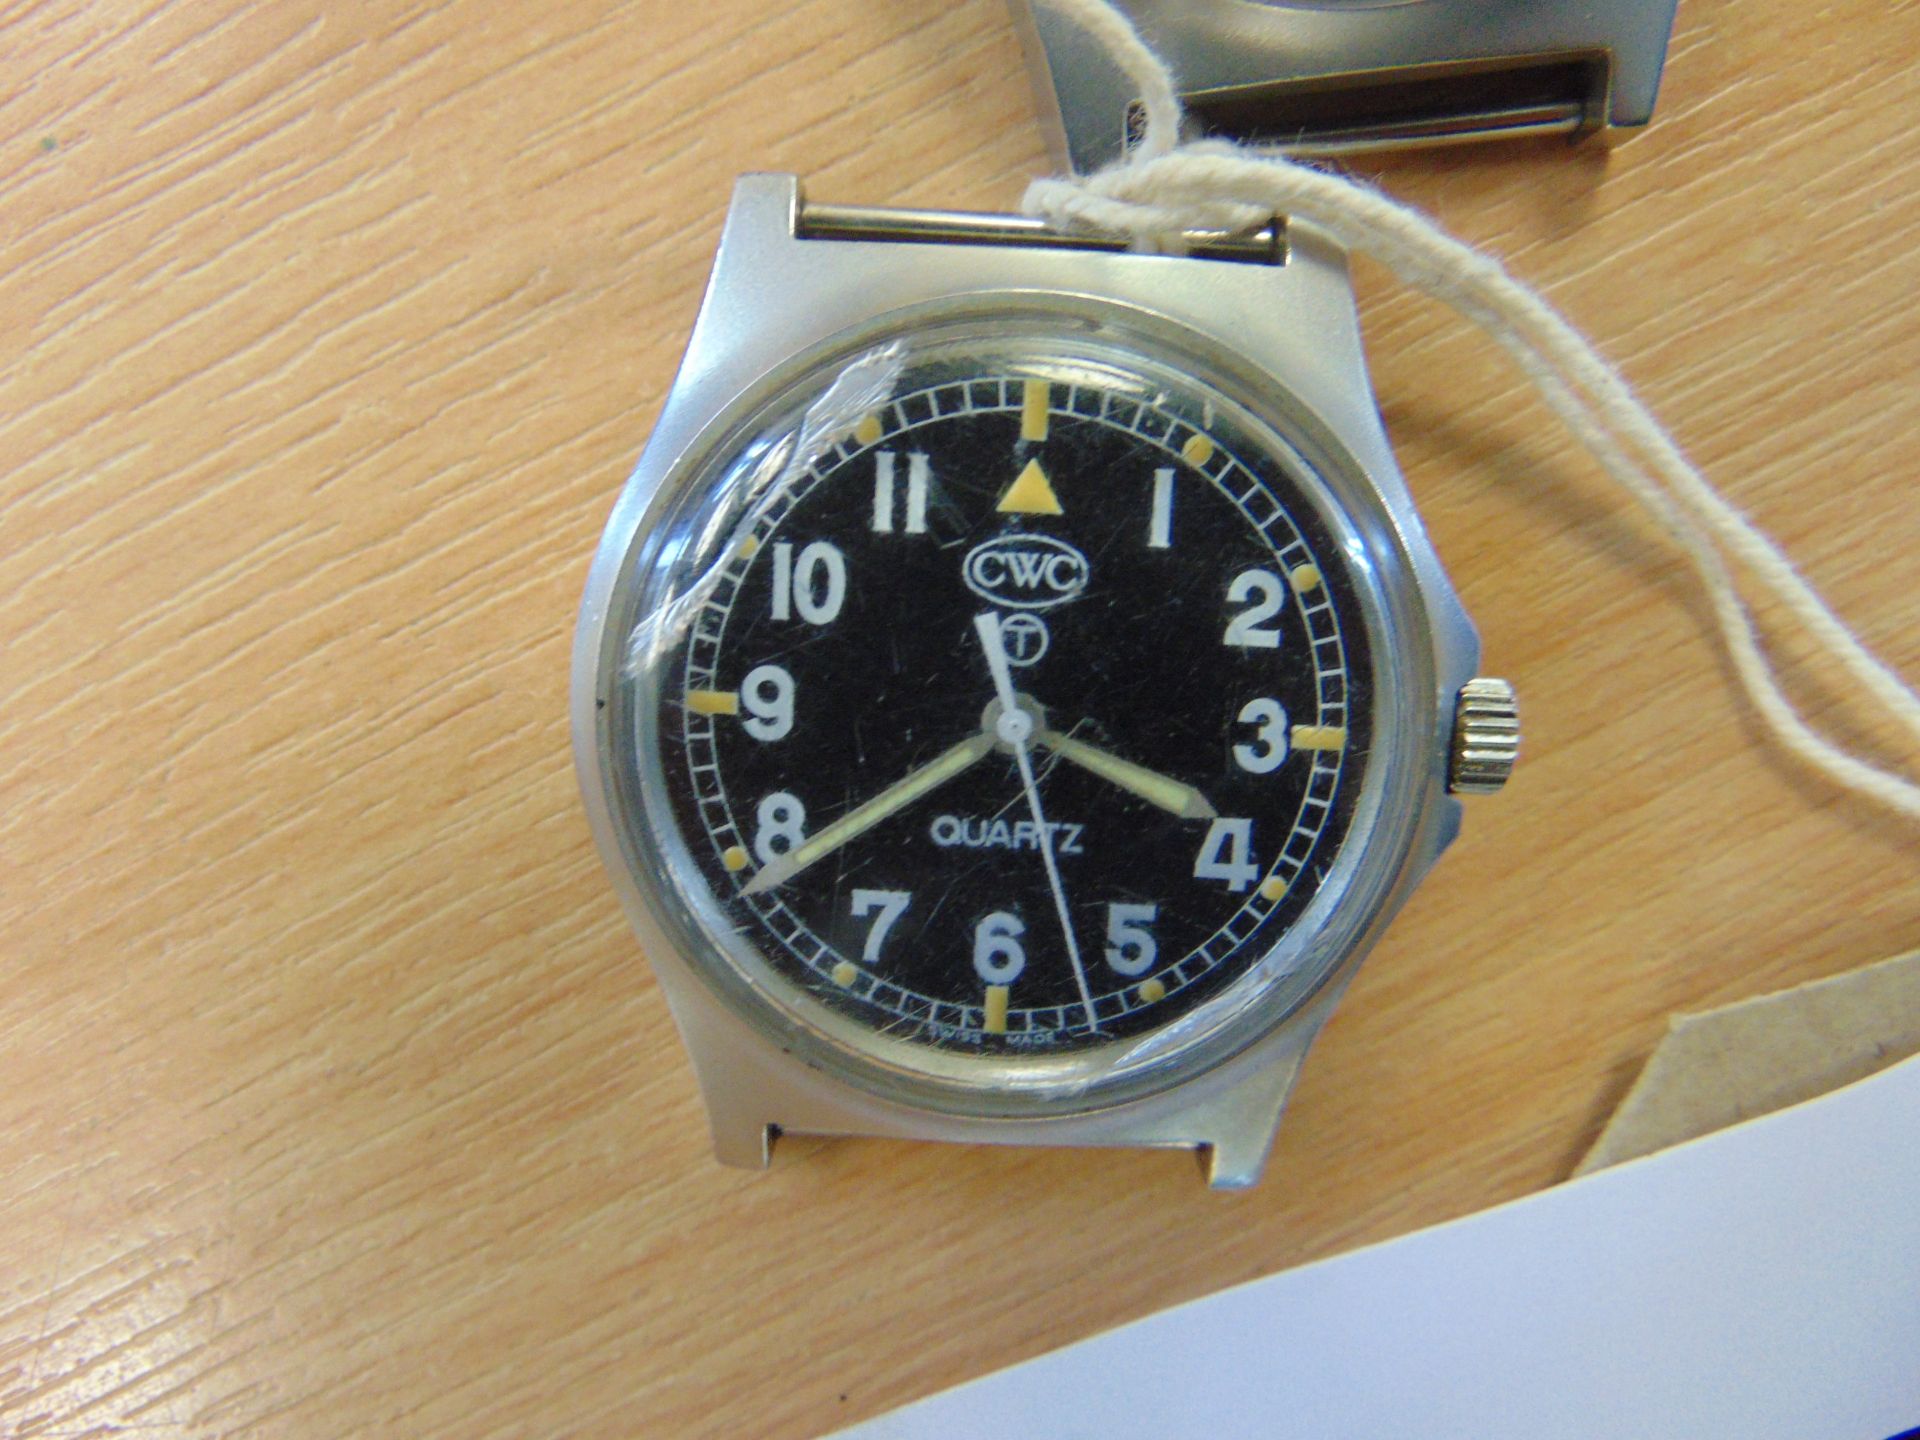 2x CWC W10 WATCHES DATED 2005 & 2006 WATER RESISTANT TO 5 ATM - Image 3 of 6